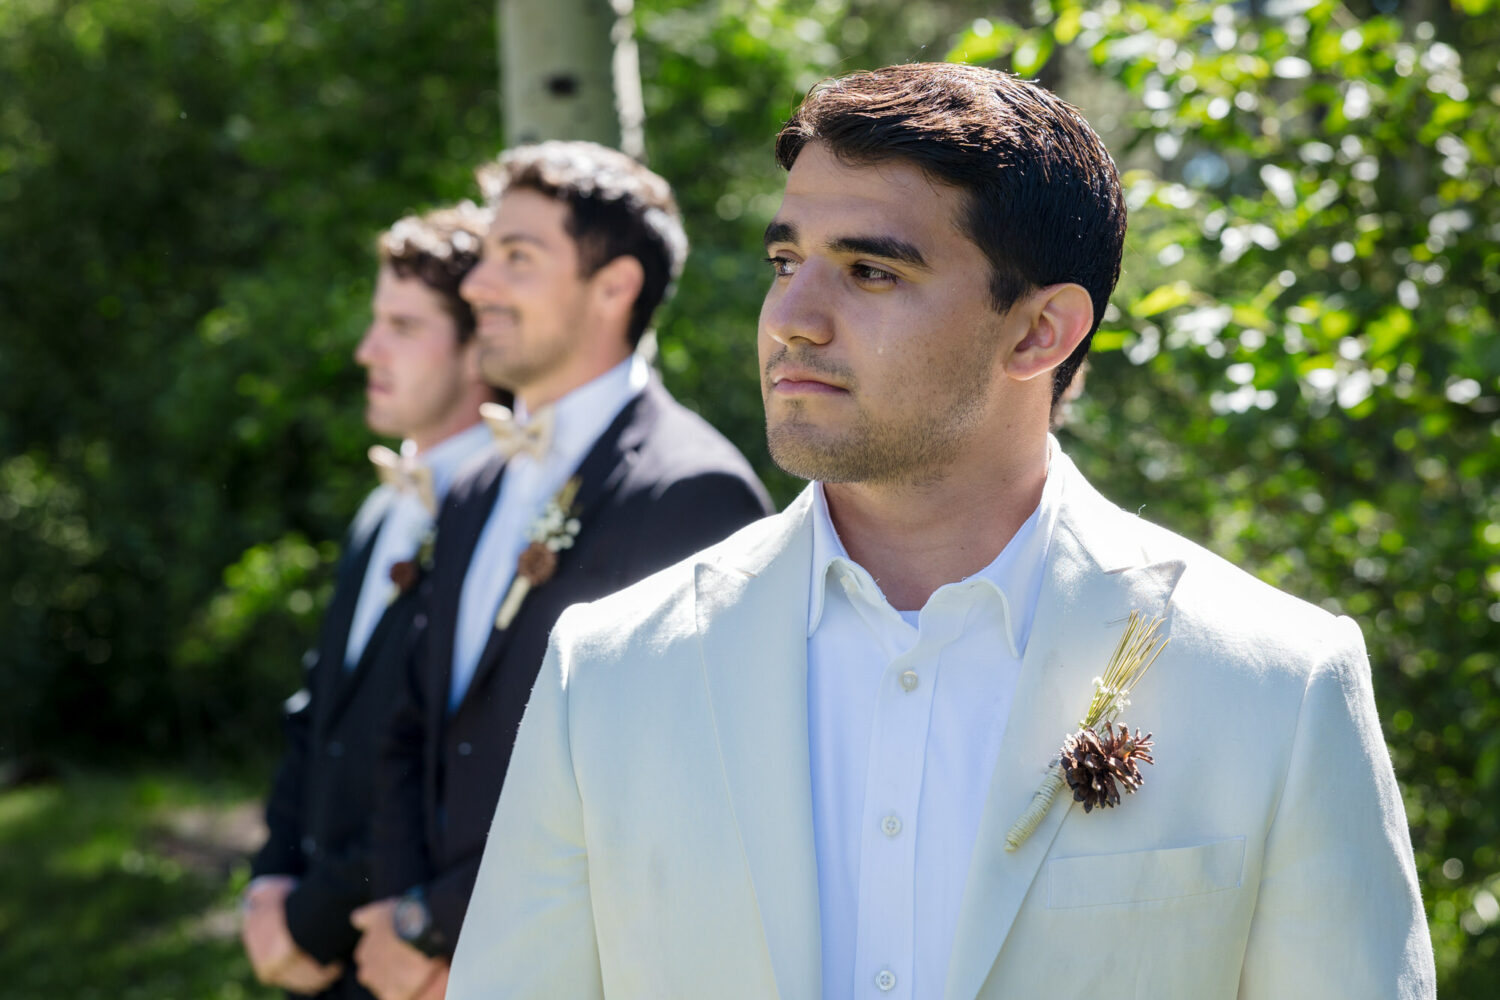 An emotional moment at the altar for a groom wearing a boutonnière with a pine cone and pine needles.